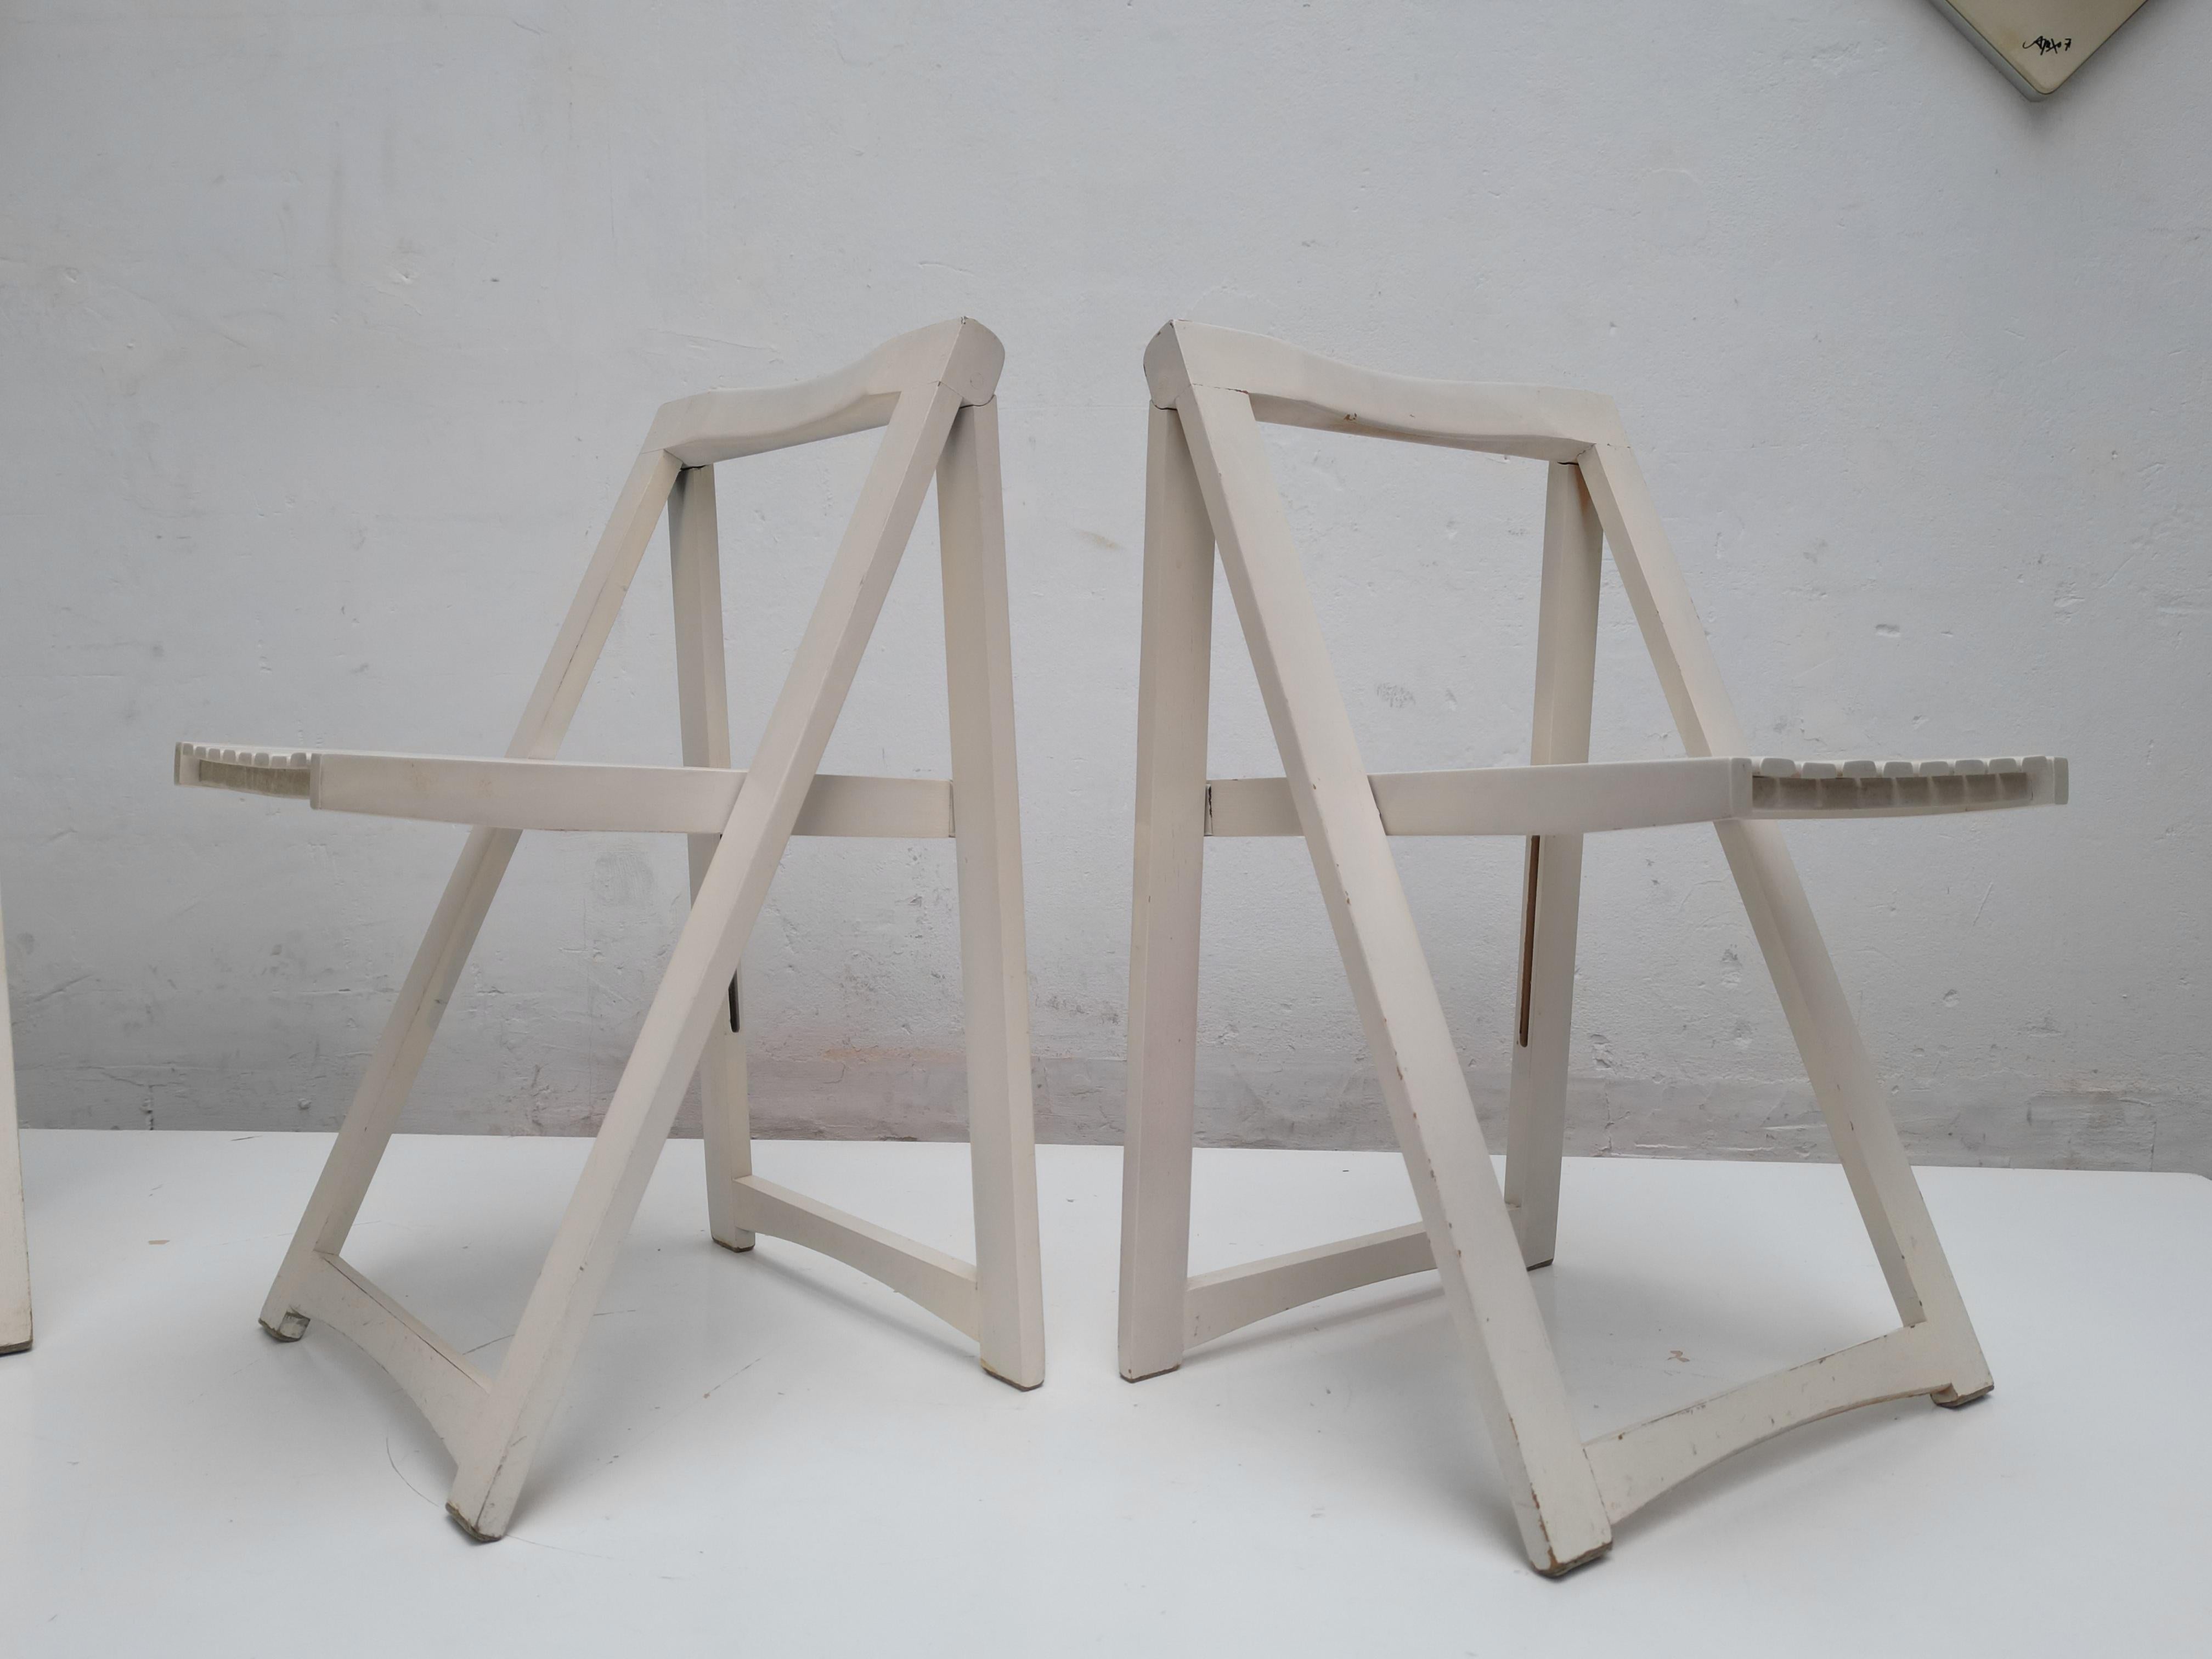 6 White Folding Chairs Attributed to Aldo Jacober for Alberto Bazzani Italy 1966 For Sale 7